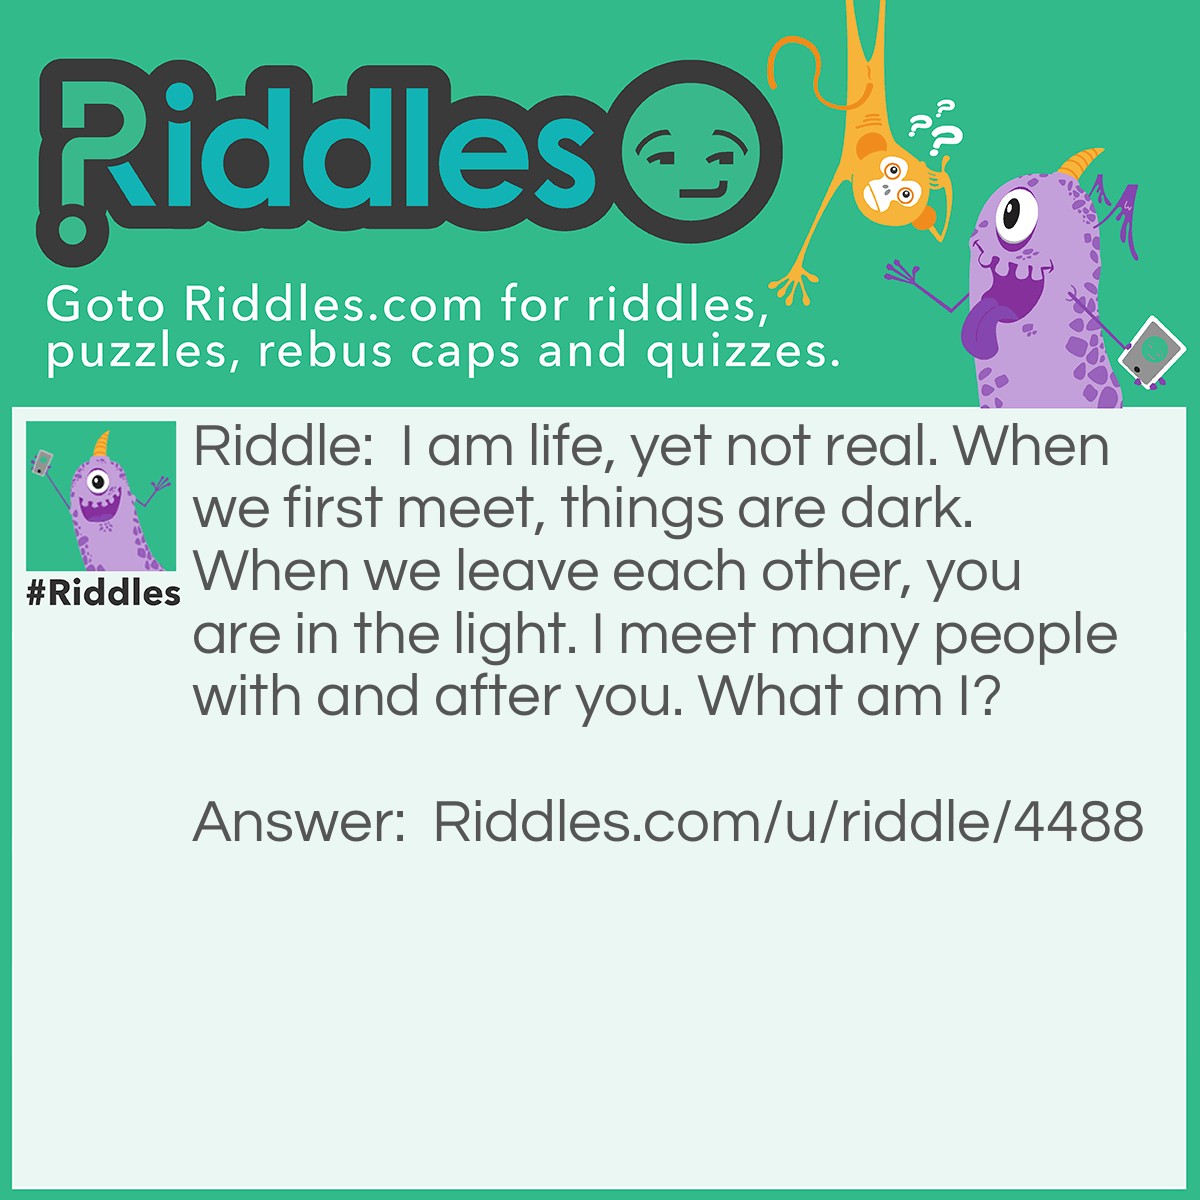 Riddle: I am life, yet not real. When we first meet, things are dark. When we leave each other, you are in the light. I meet many people with and after you. What am I? Answer: A movie.